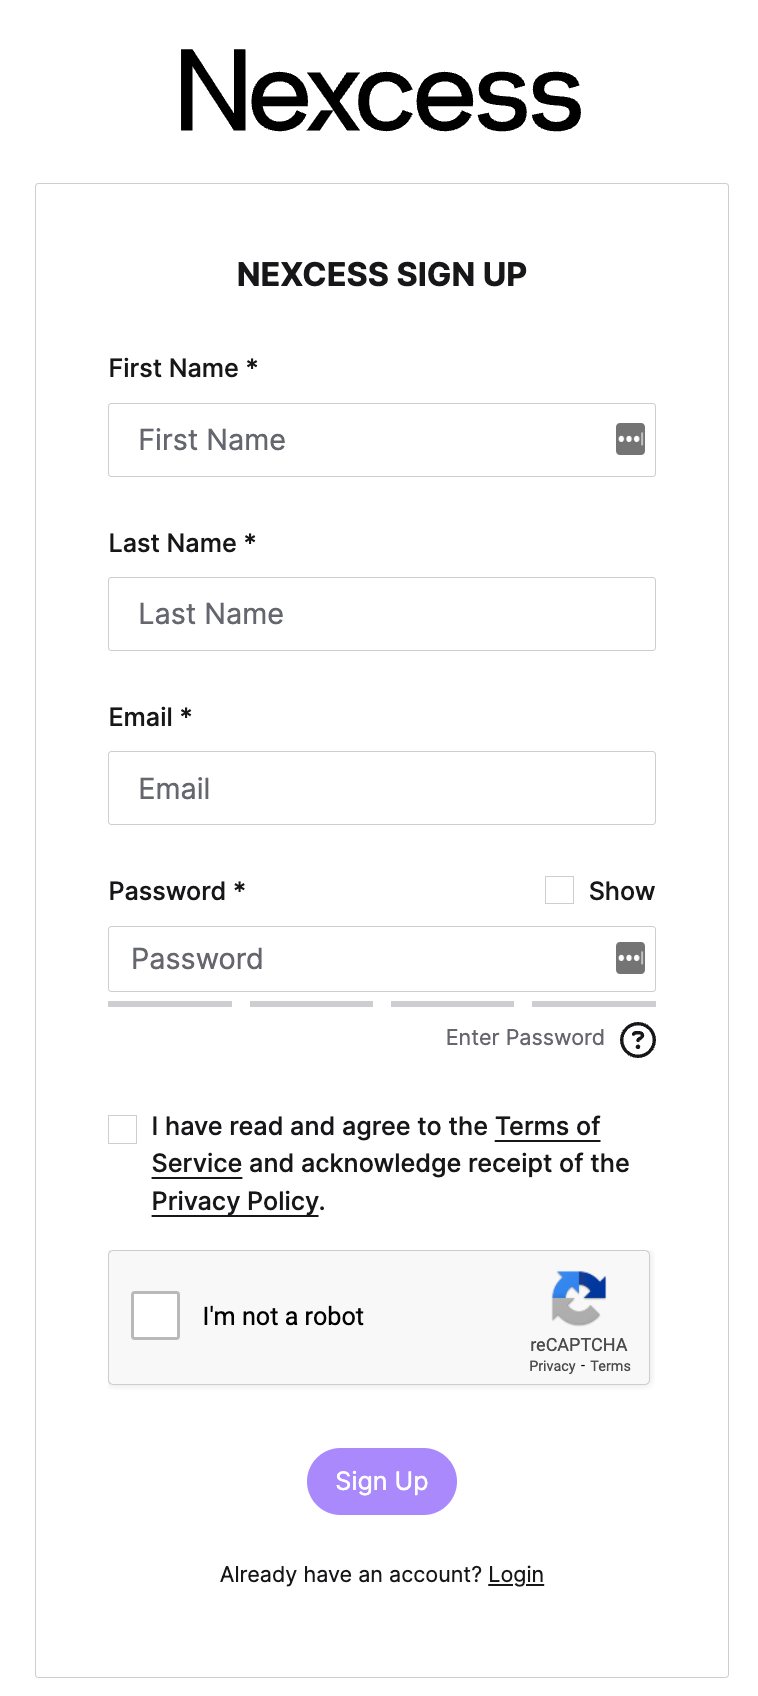 Utilizing the Sign Up option, new users can set up a Nexcess account.